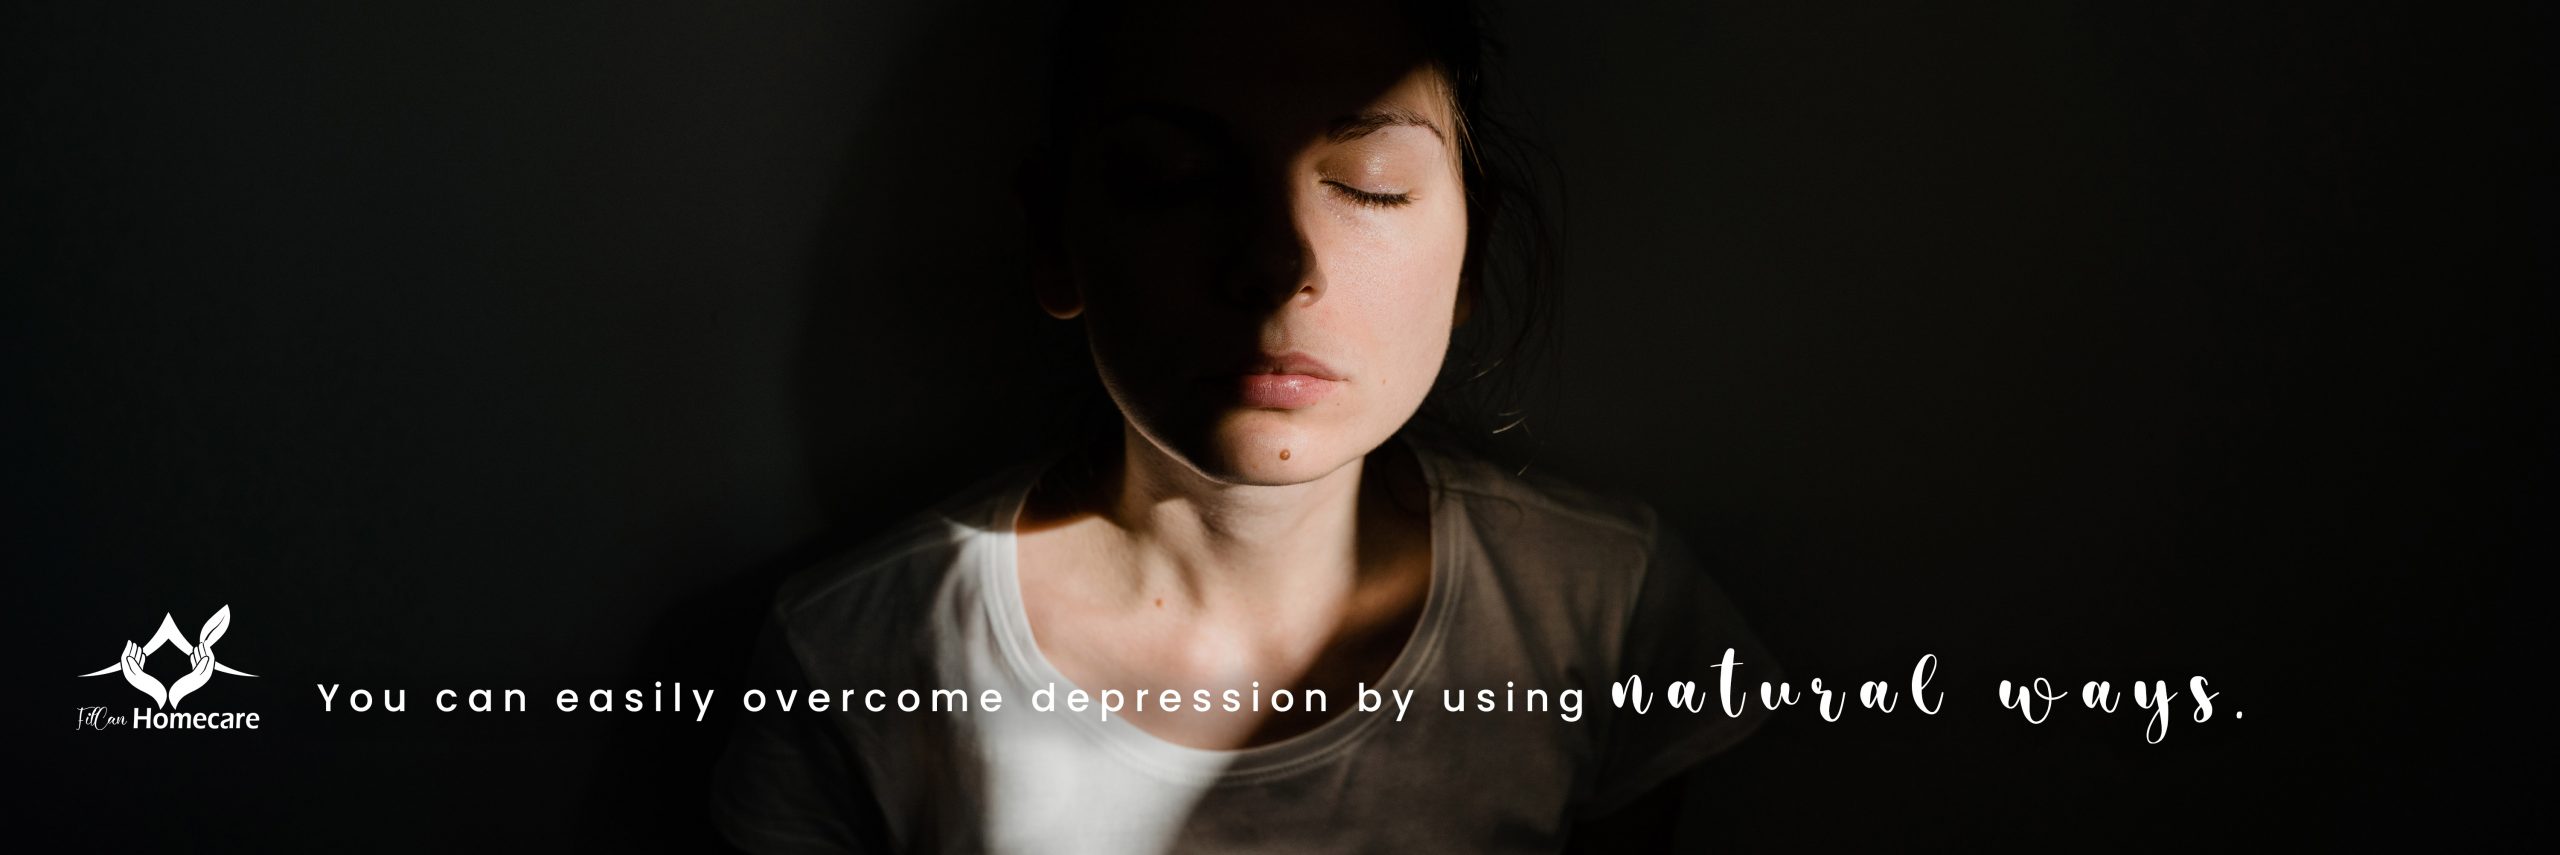 you-can-easily-overcome-depression-in-6-ways-filcan-homecare